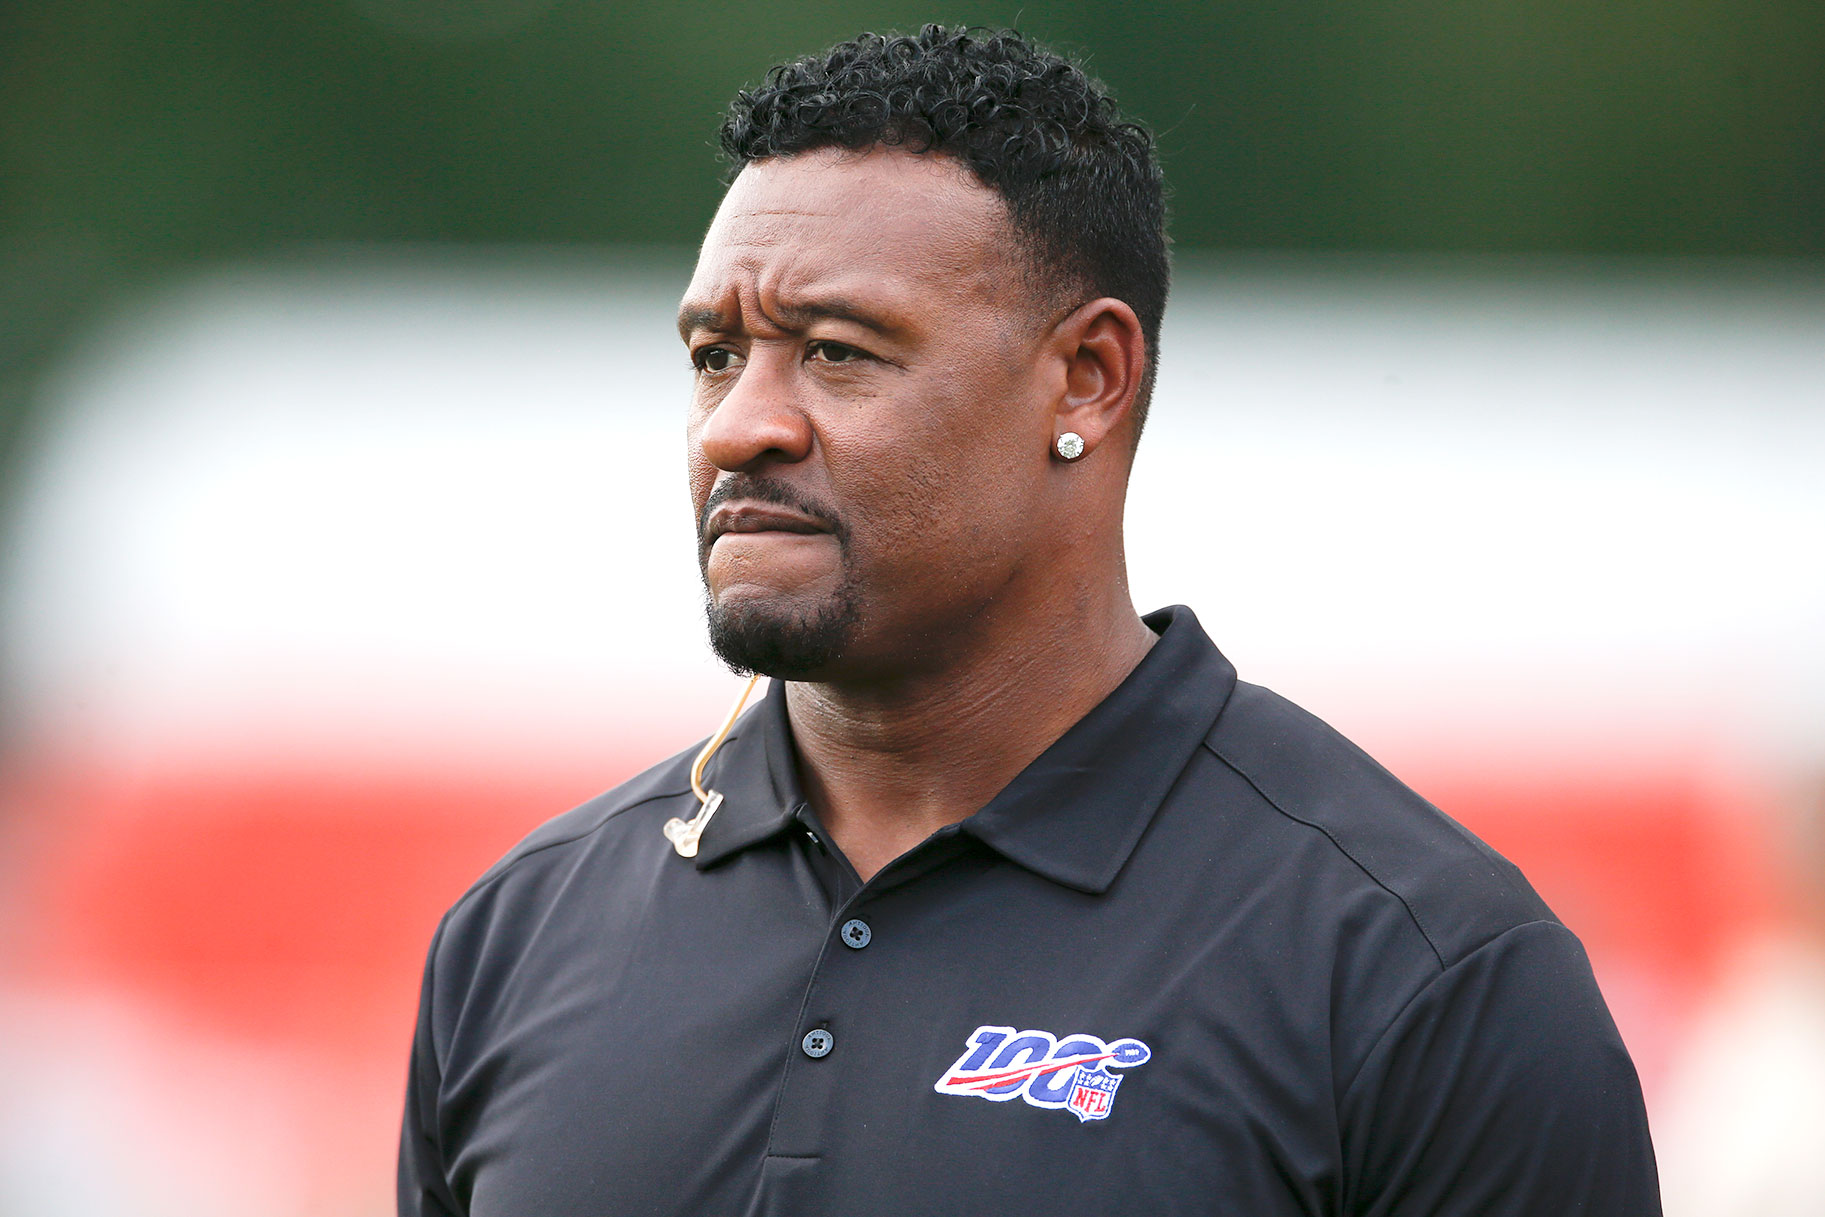 Willie McGinest Jr. watches the Cleveland Browns